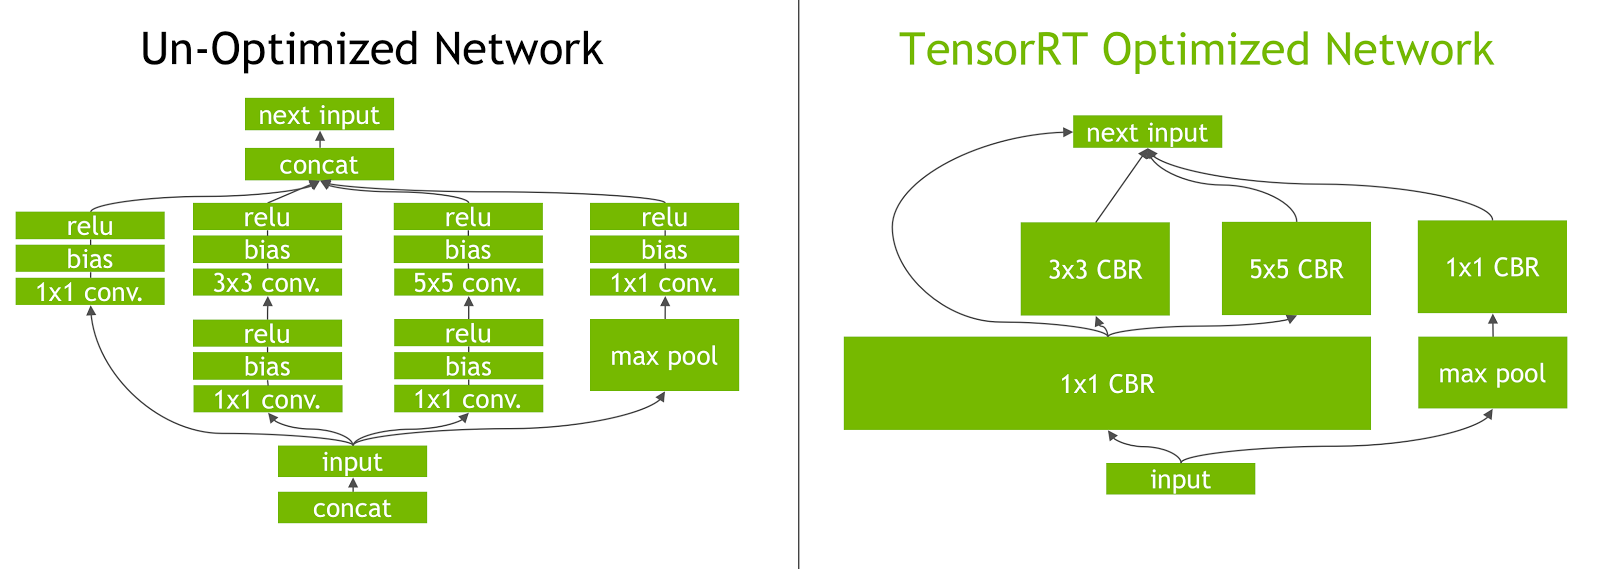 Figure 4. TensorRT’s vertical and horizontal layer fusion and layer elimination optimizations simplify the GoogLeNet Inception module graph, reducing computation and memory overhead.